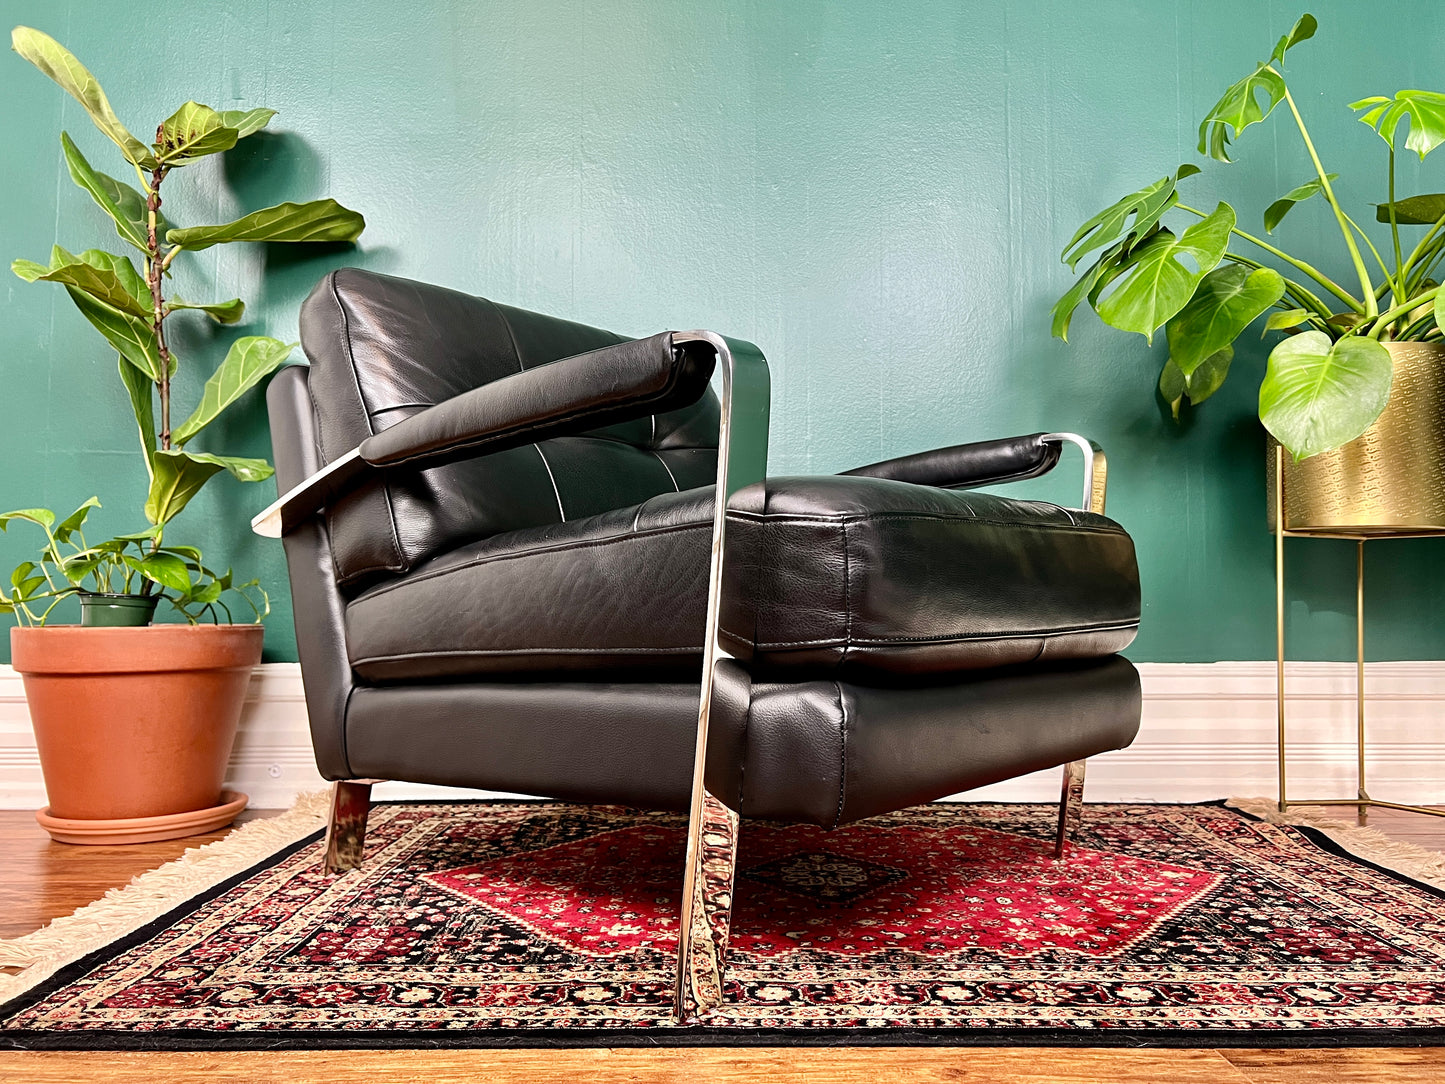 The Jet Stream Chair